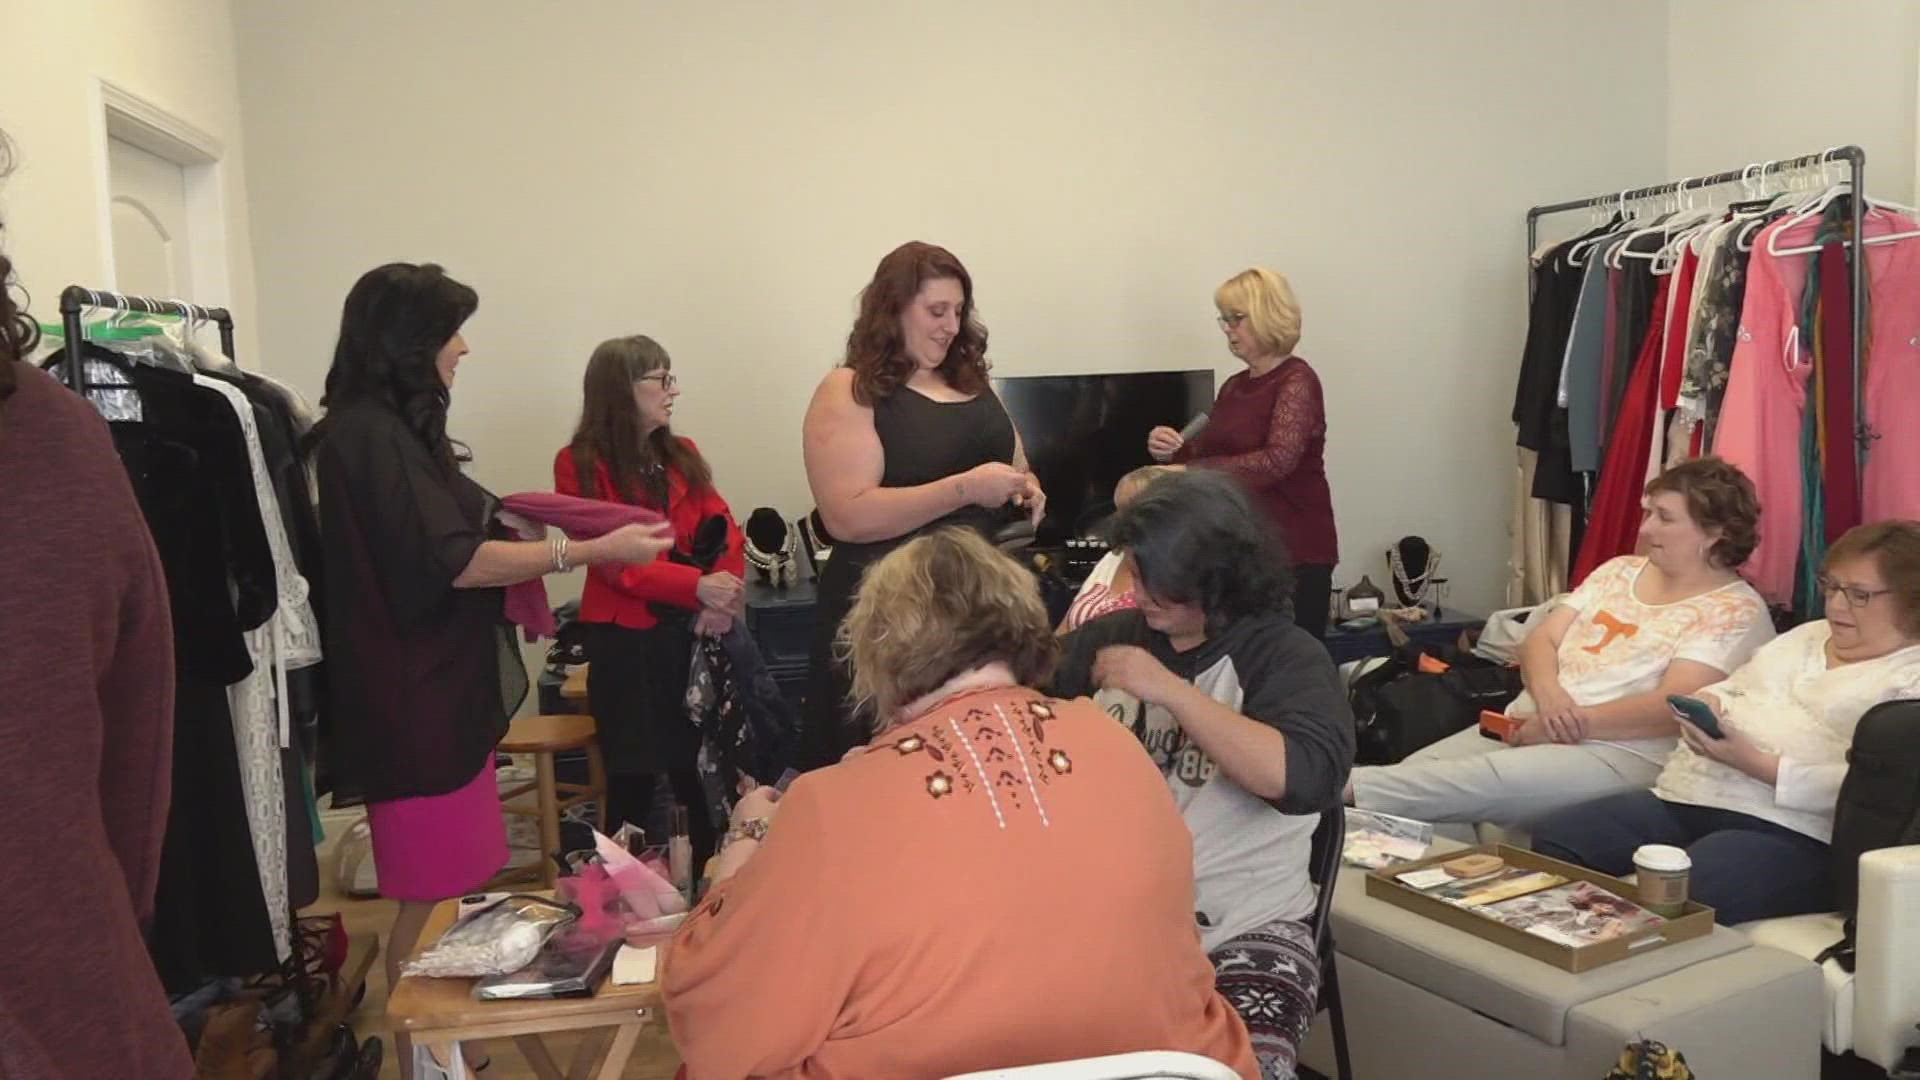 The Hand Up for Women organization gave a makeover to 11 women who are working hard to break the cycle of addiction and abuse.